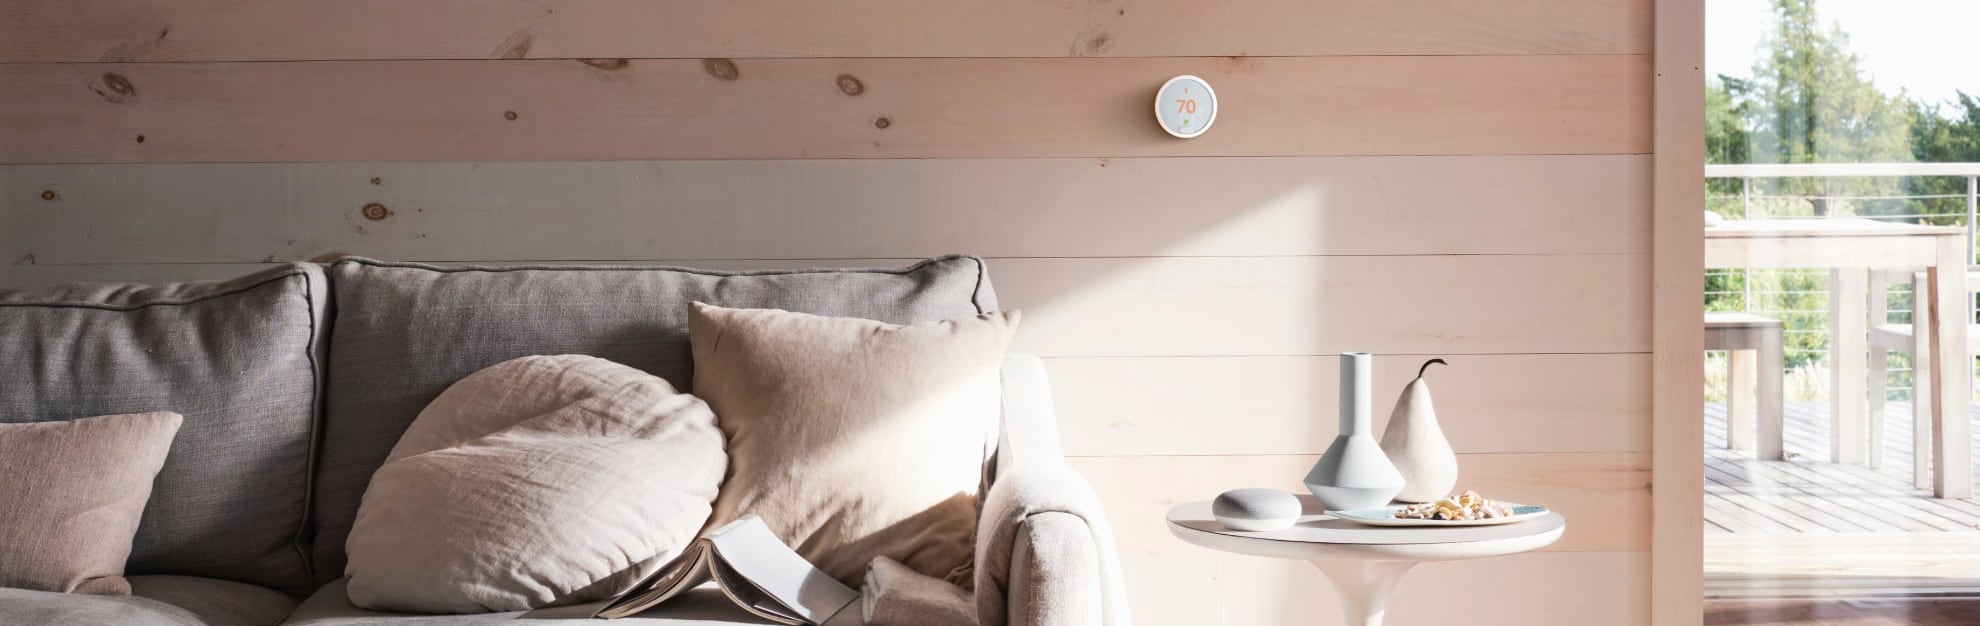 Vivint Home Automation in Charlottesville